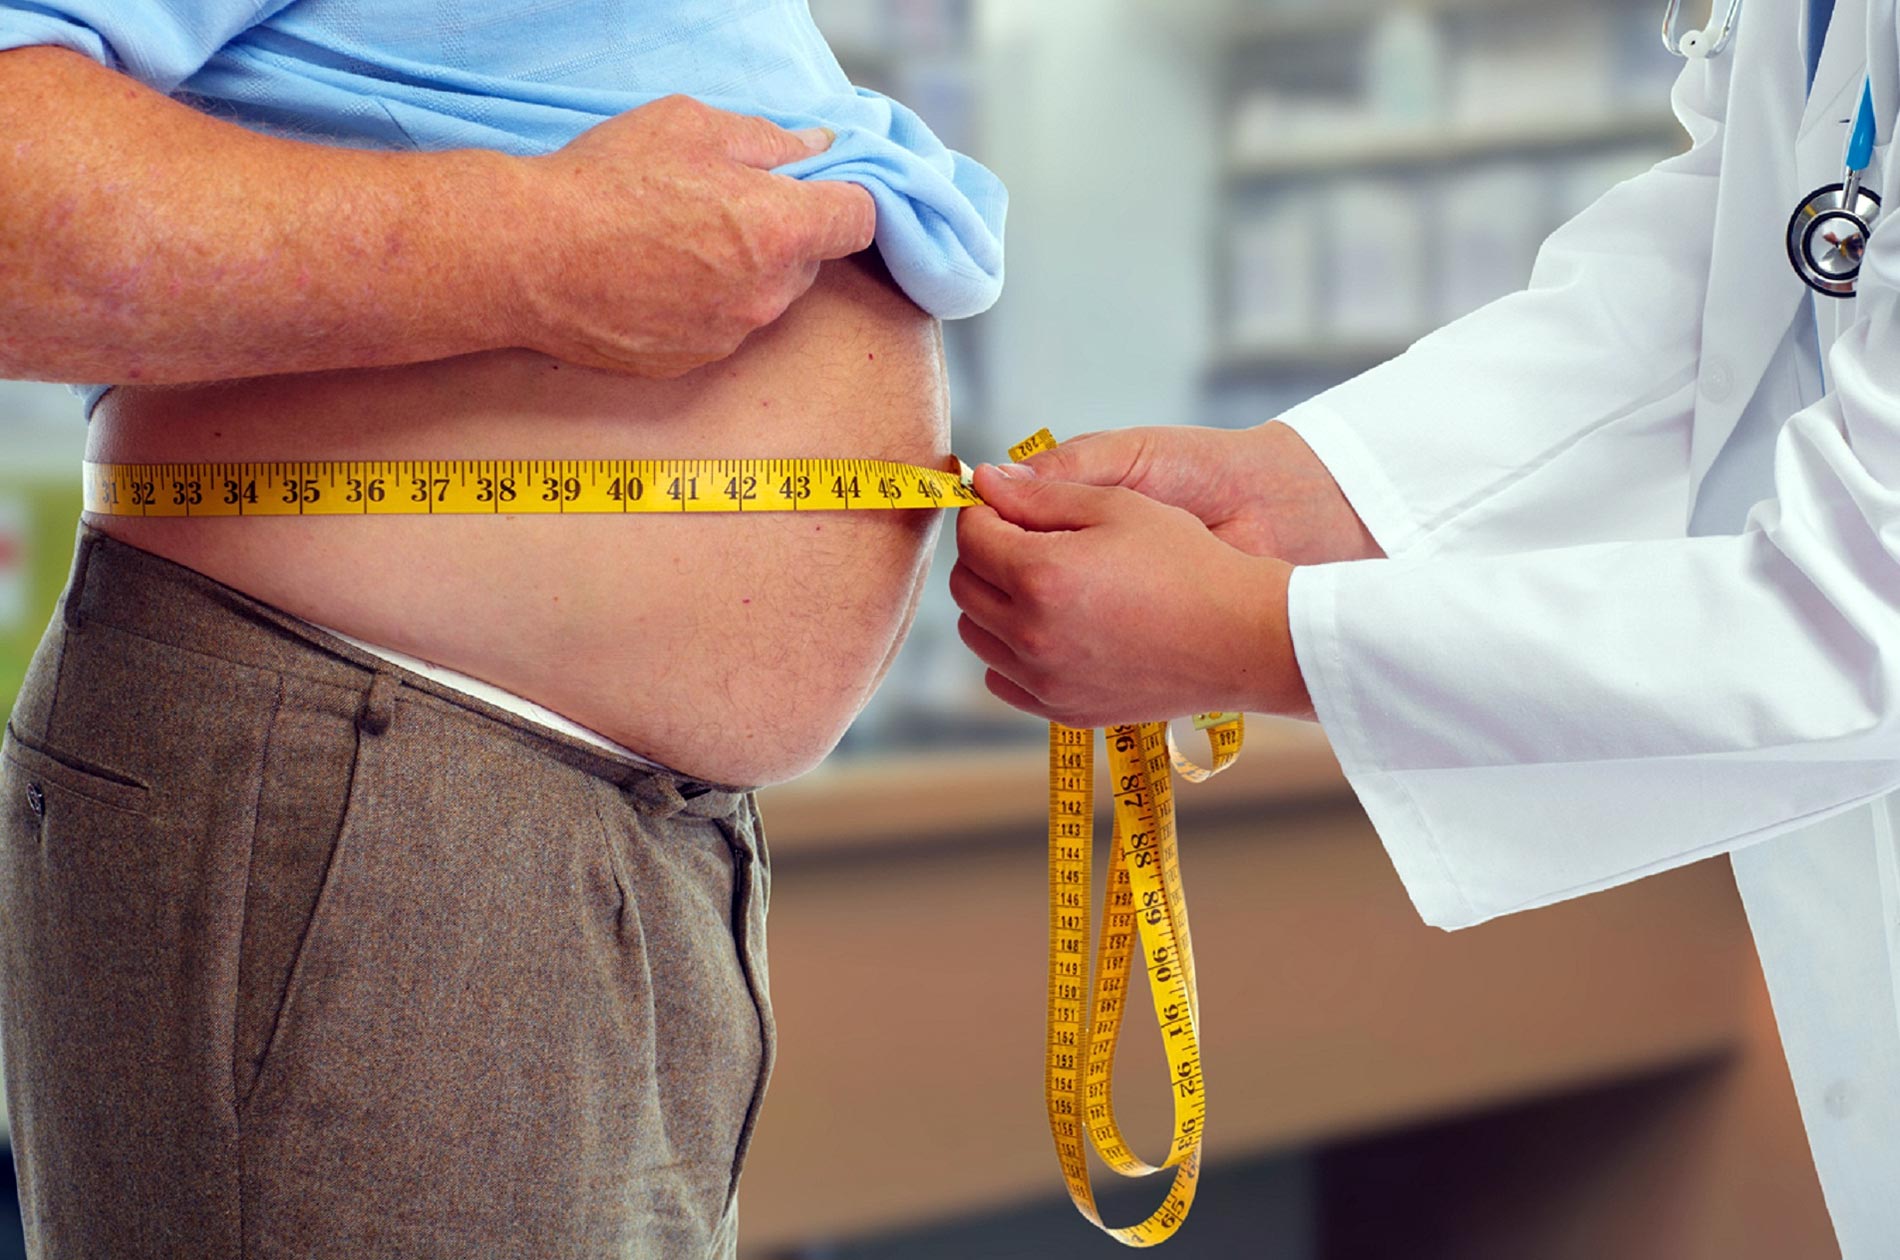 Goodbye BMI: Doctors Suggest a New Approach to Calculate Your Health